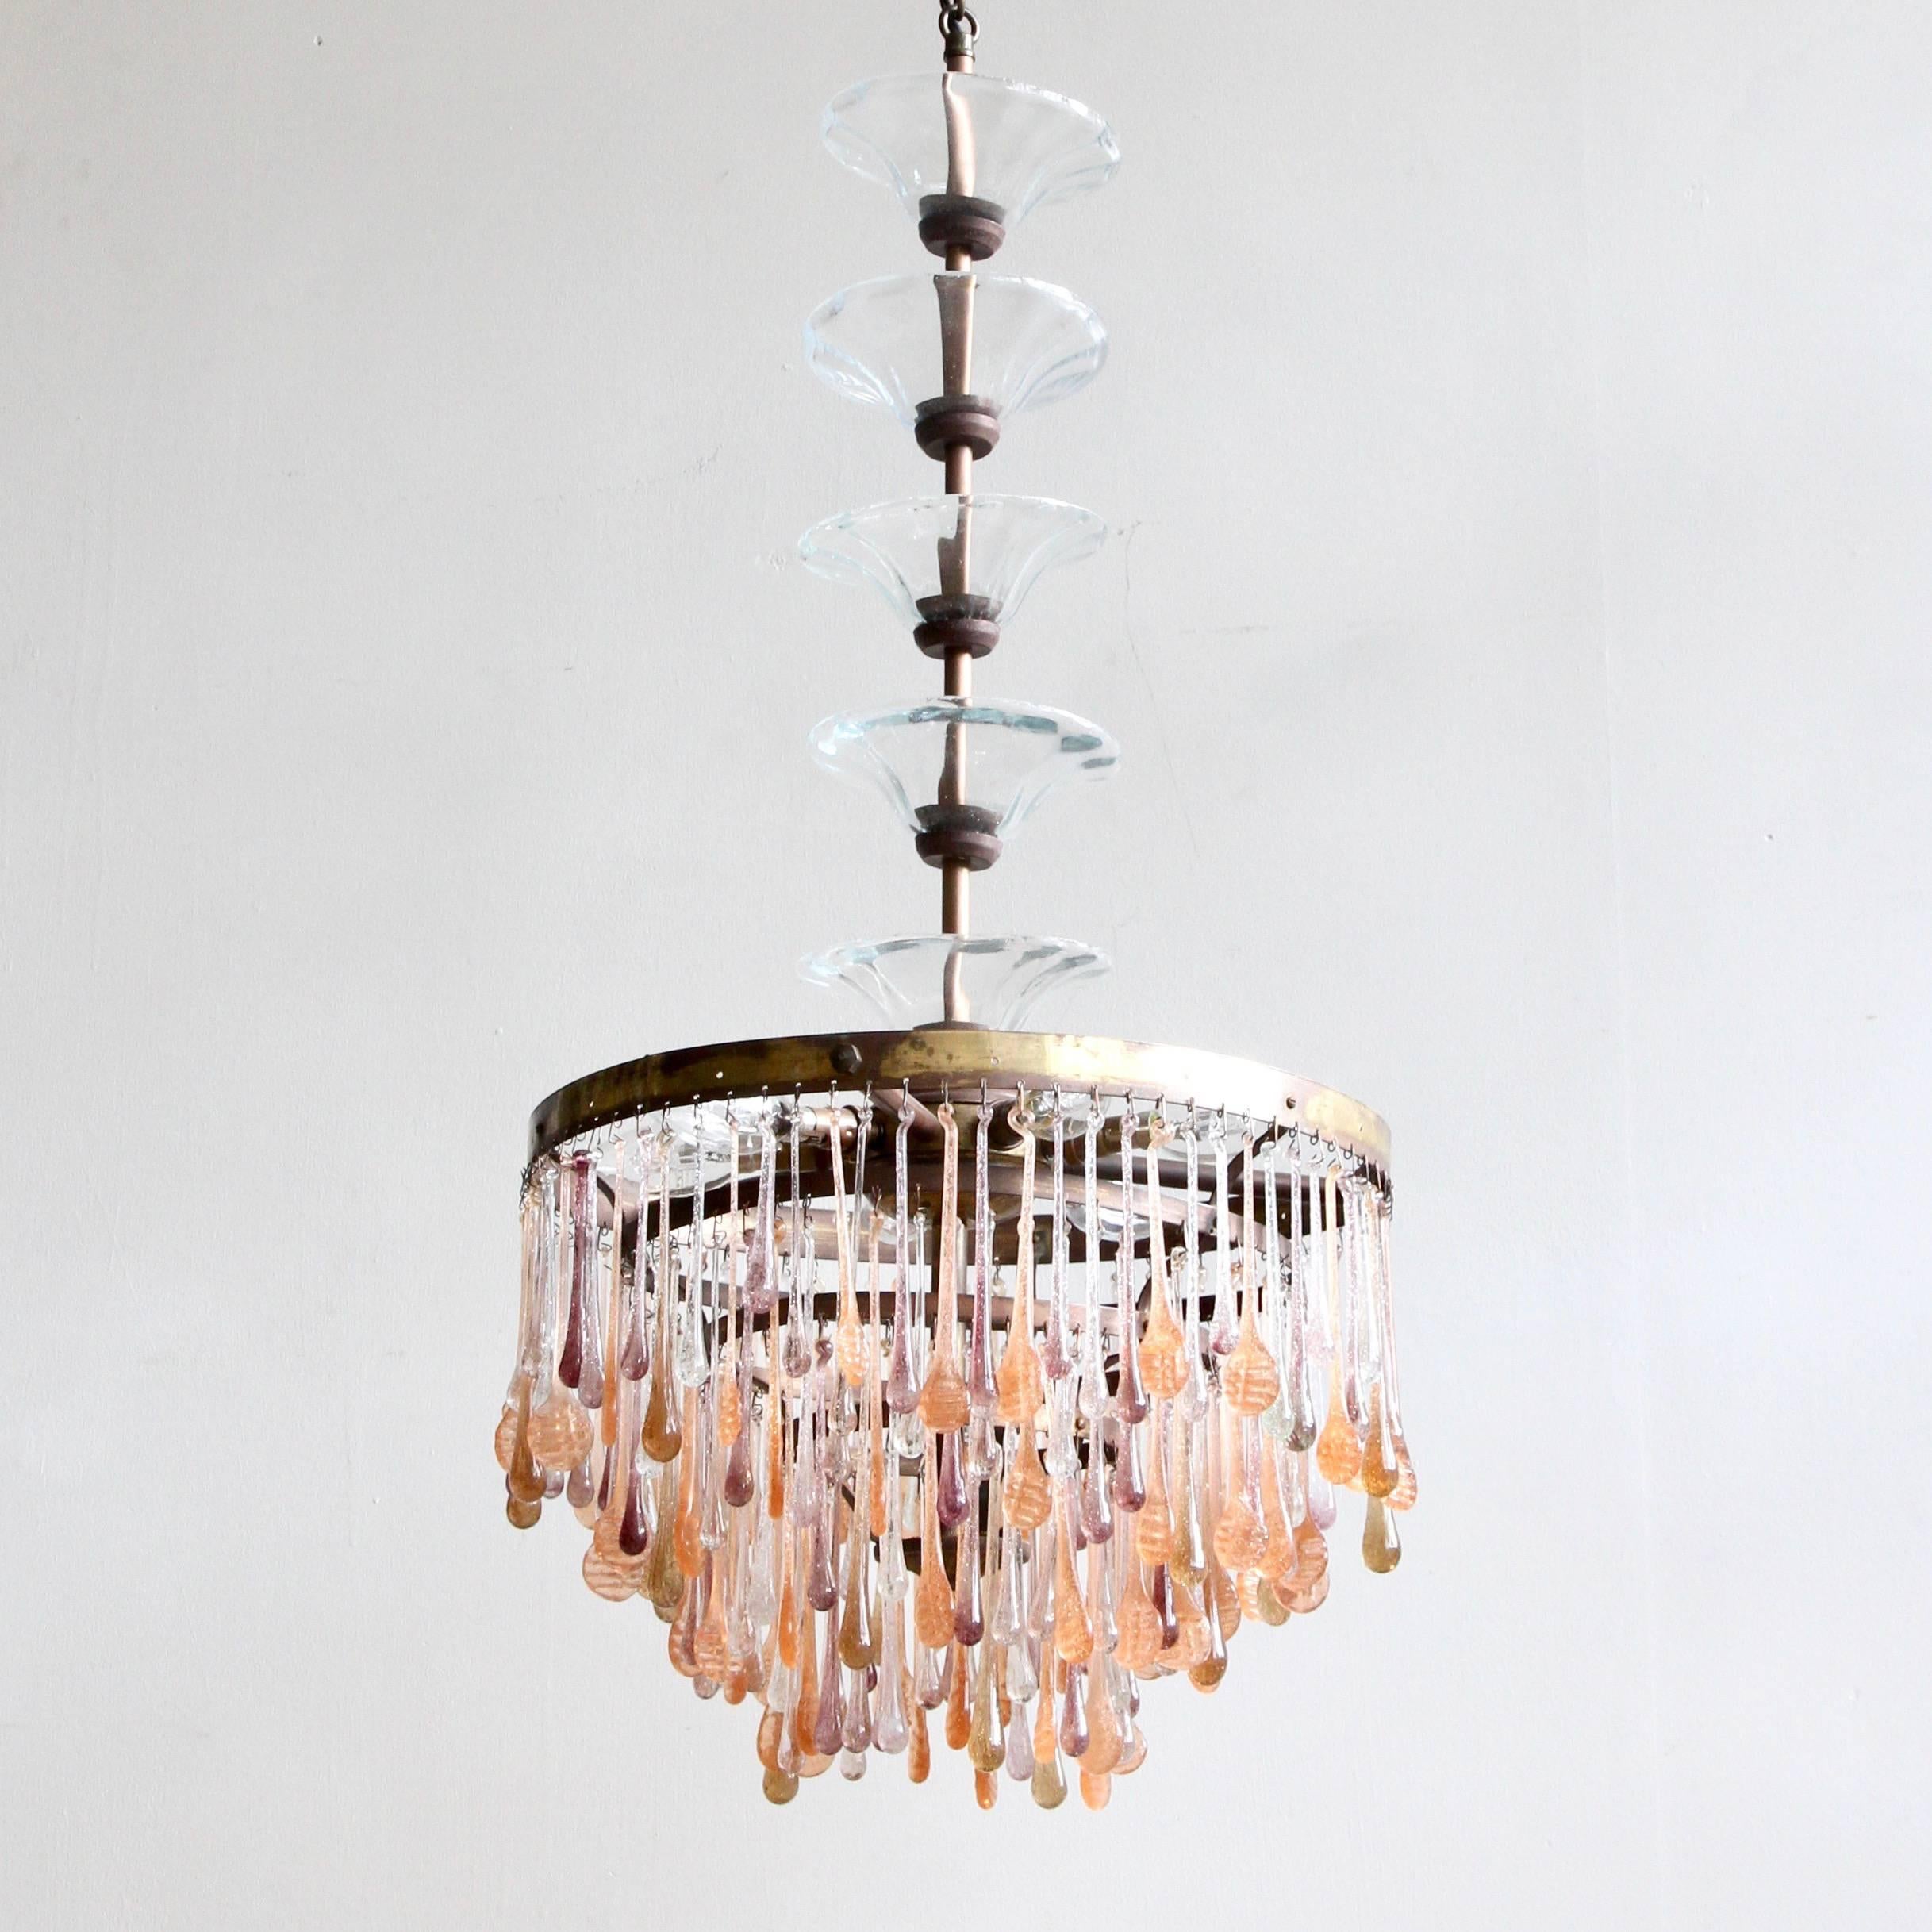 This coloured teardrop waterfall chandelier is dressed in shades of amethyst, peach and clear glass teardrops. We bought this old light in France and it was missing the whole top section and all its drops so we made a new top with a tall brass stem